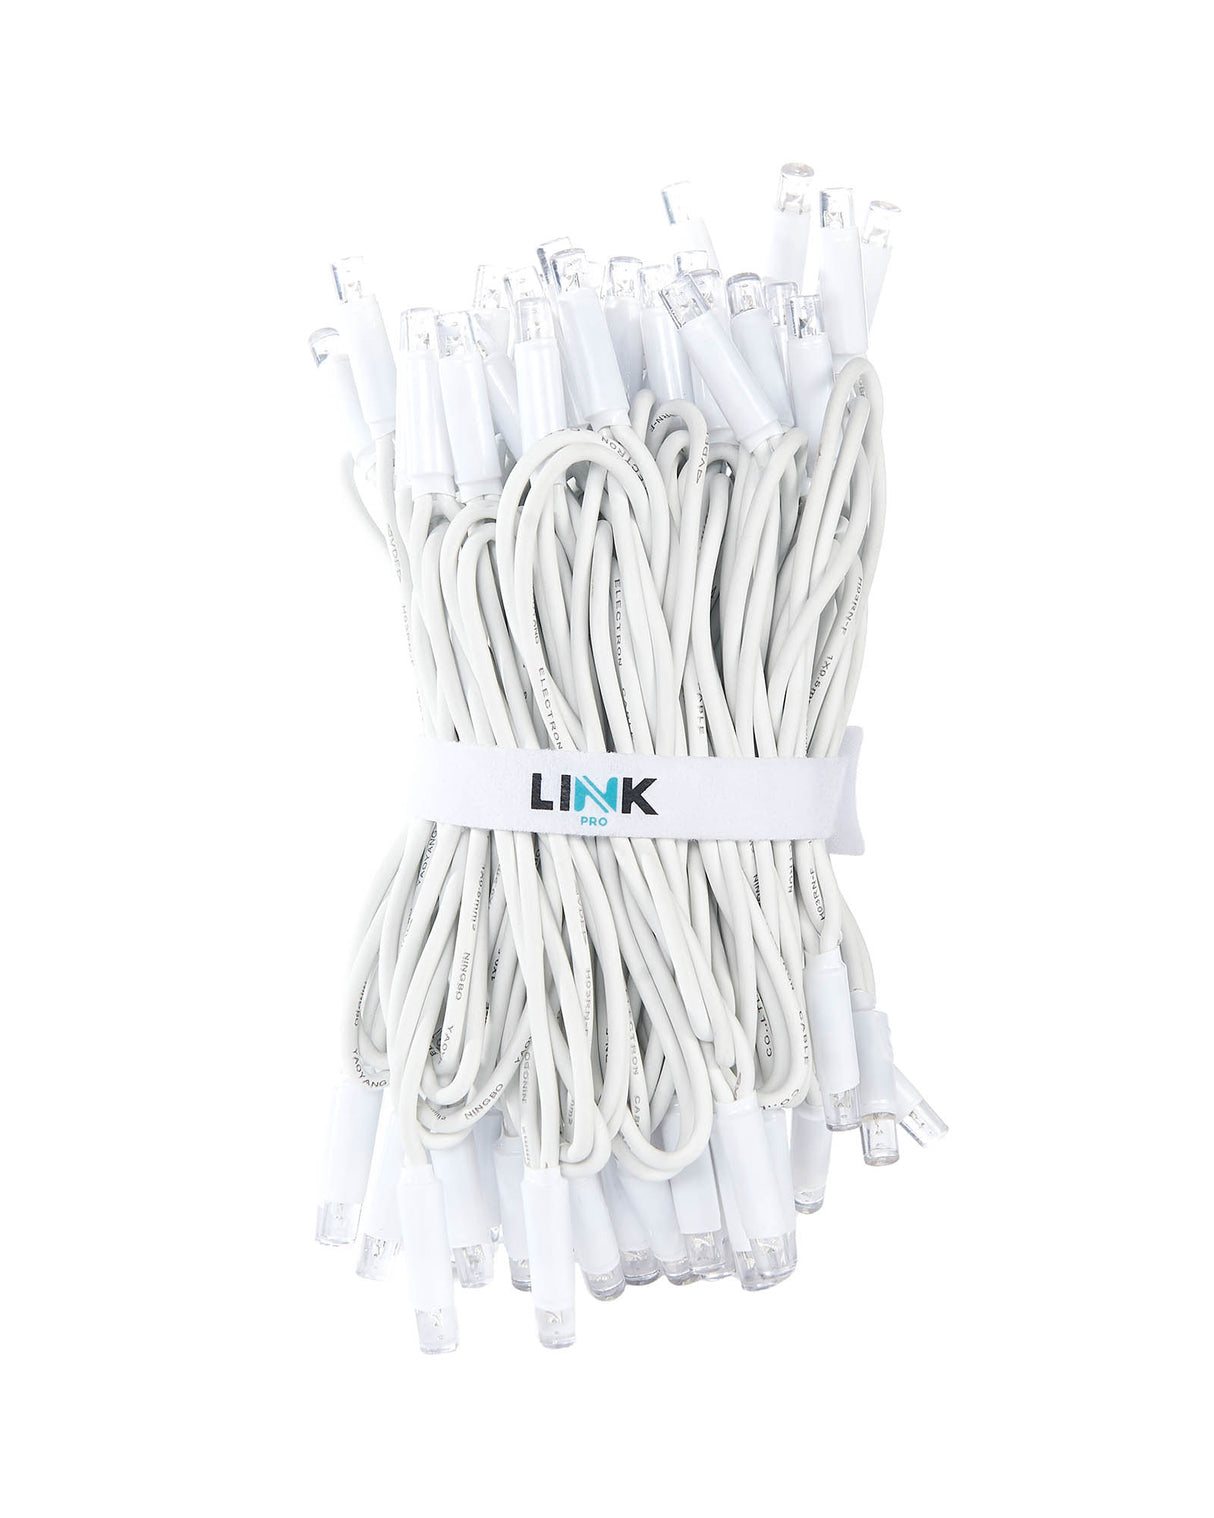 LINK PRO Twinkle LED String Lights, White Cable, Warm White